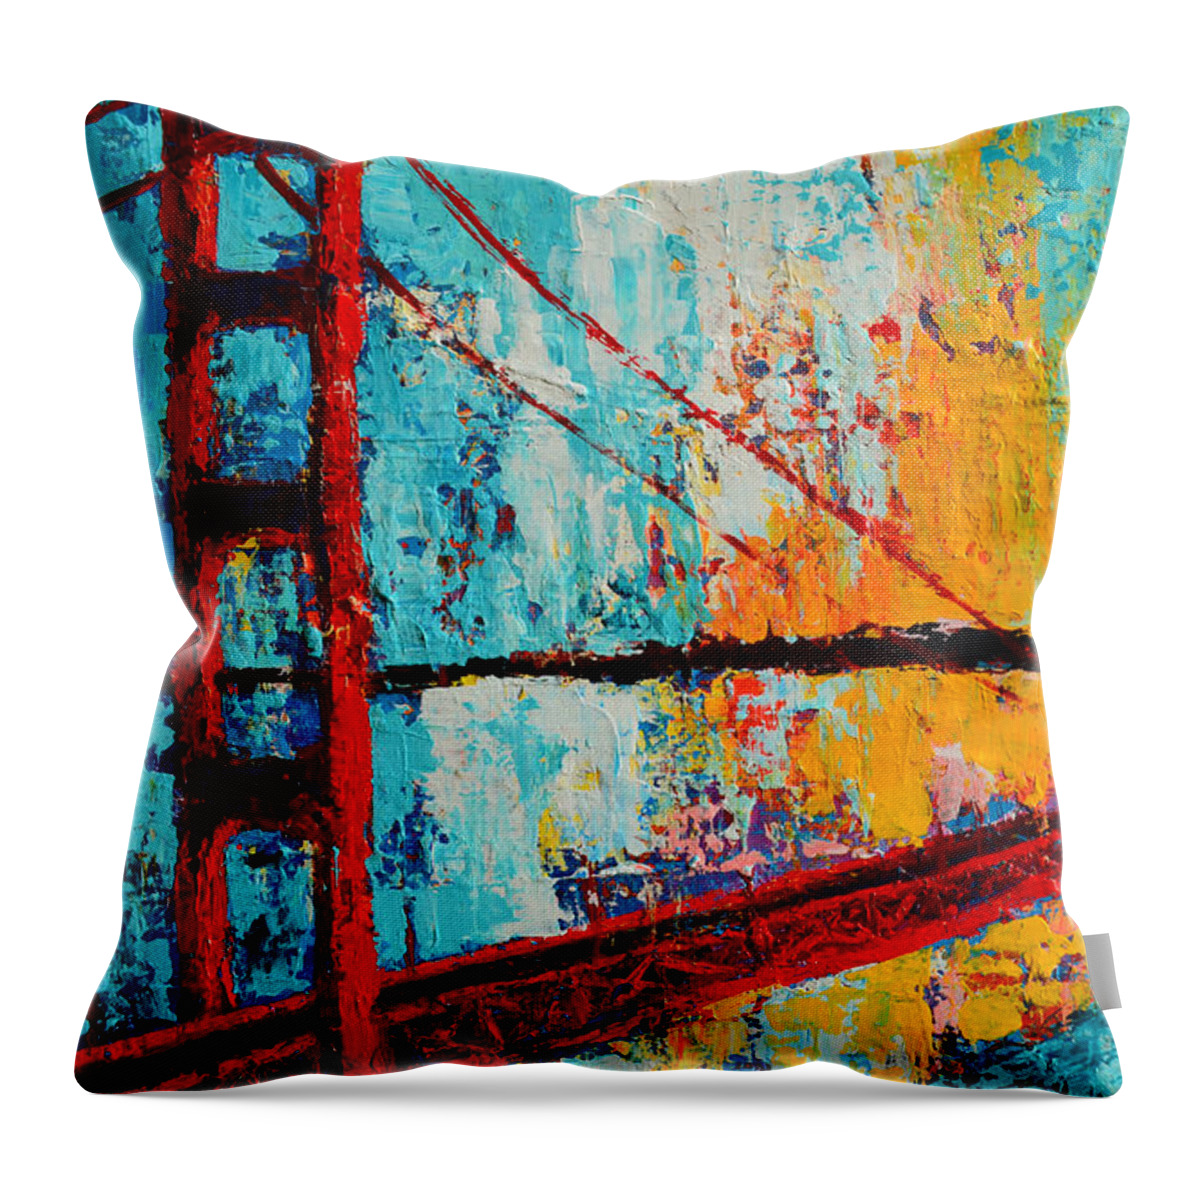 Landmark Throw Pillow featuring the painting Golden Gate Bridge Modern Impressionistic Landscape Painting Palette Knife work by Patricia Awapara